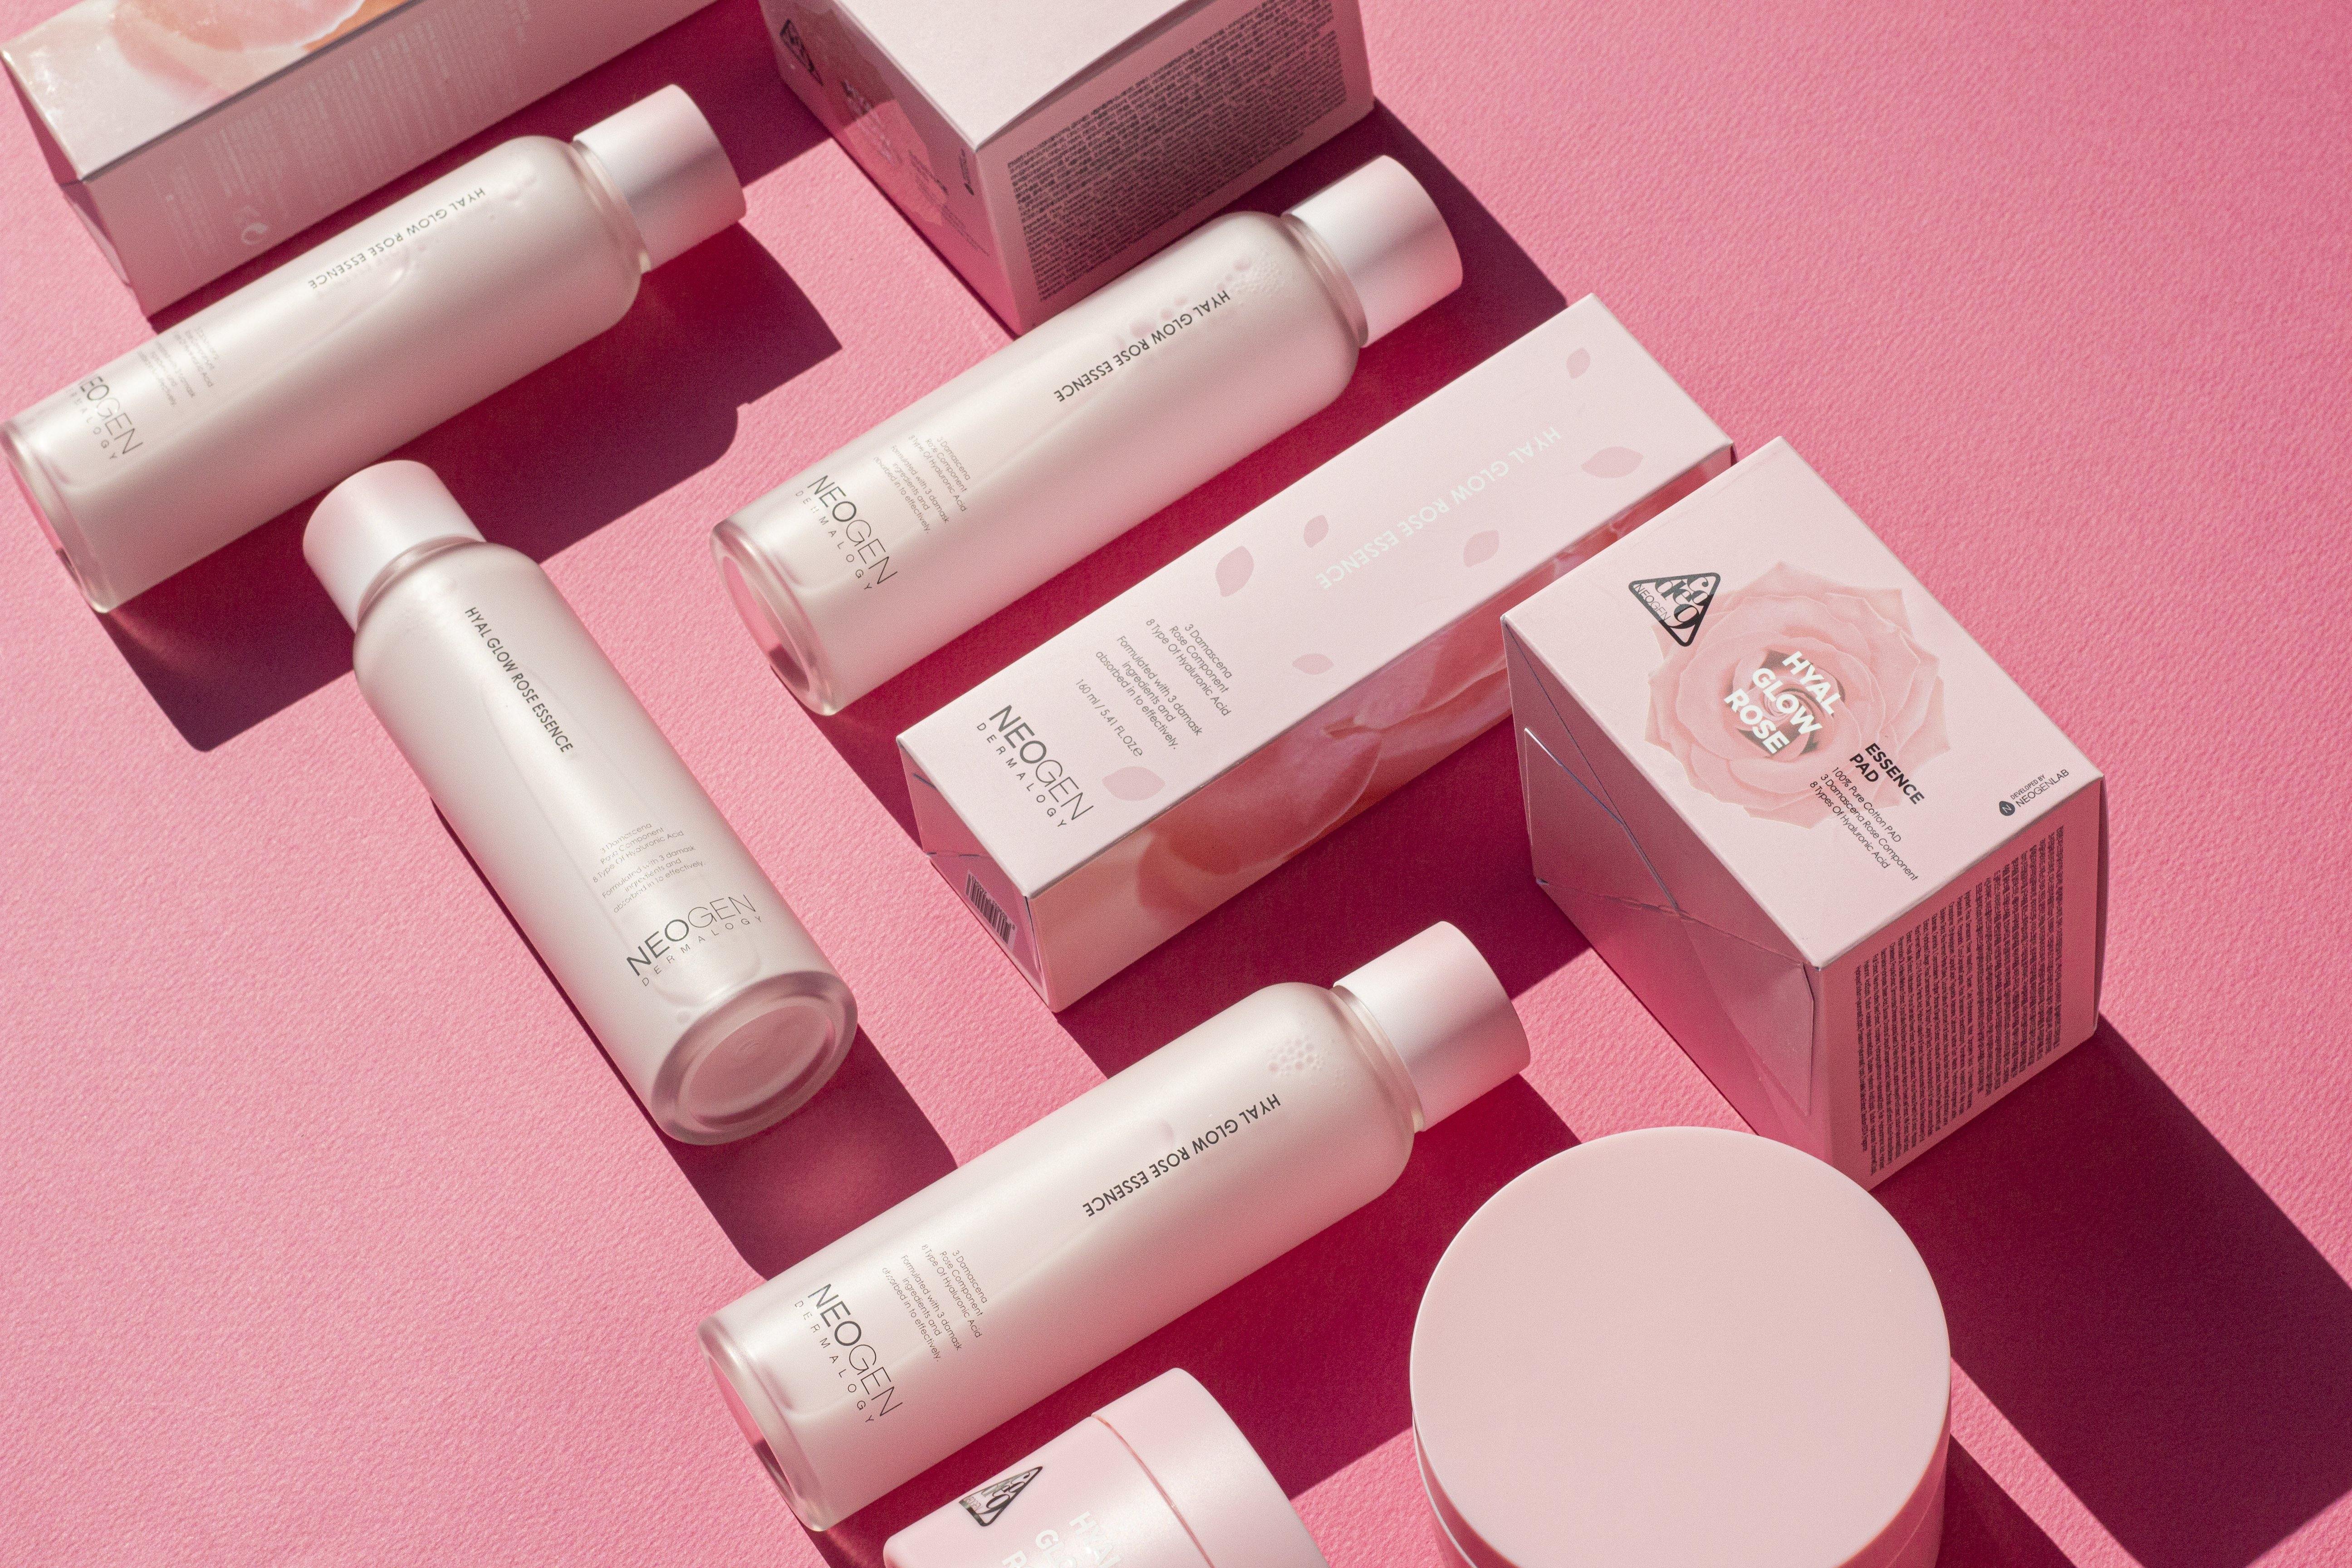 NEO I SPOTLIGHT<br> Hyal Glow Rose Essence:  Your skin’s new best friend for weather transition - NEOGEN GLOBAL